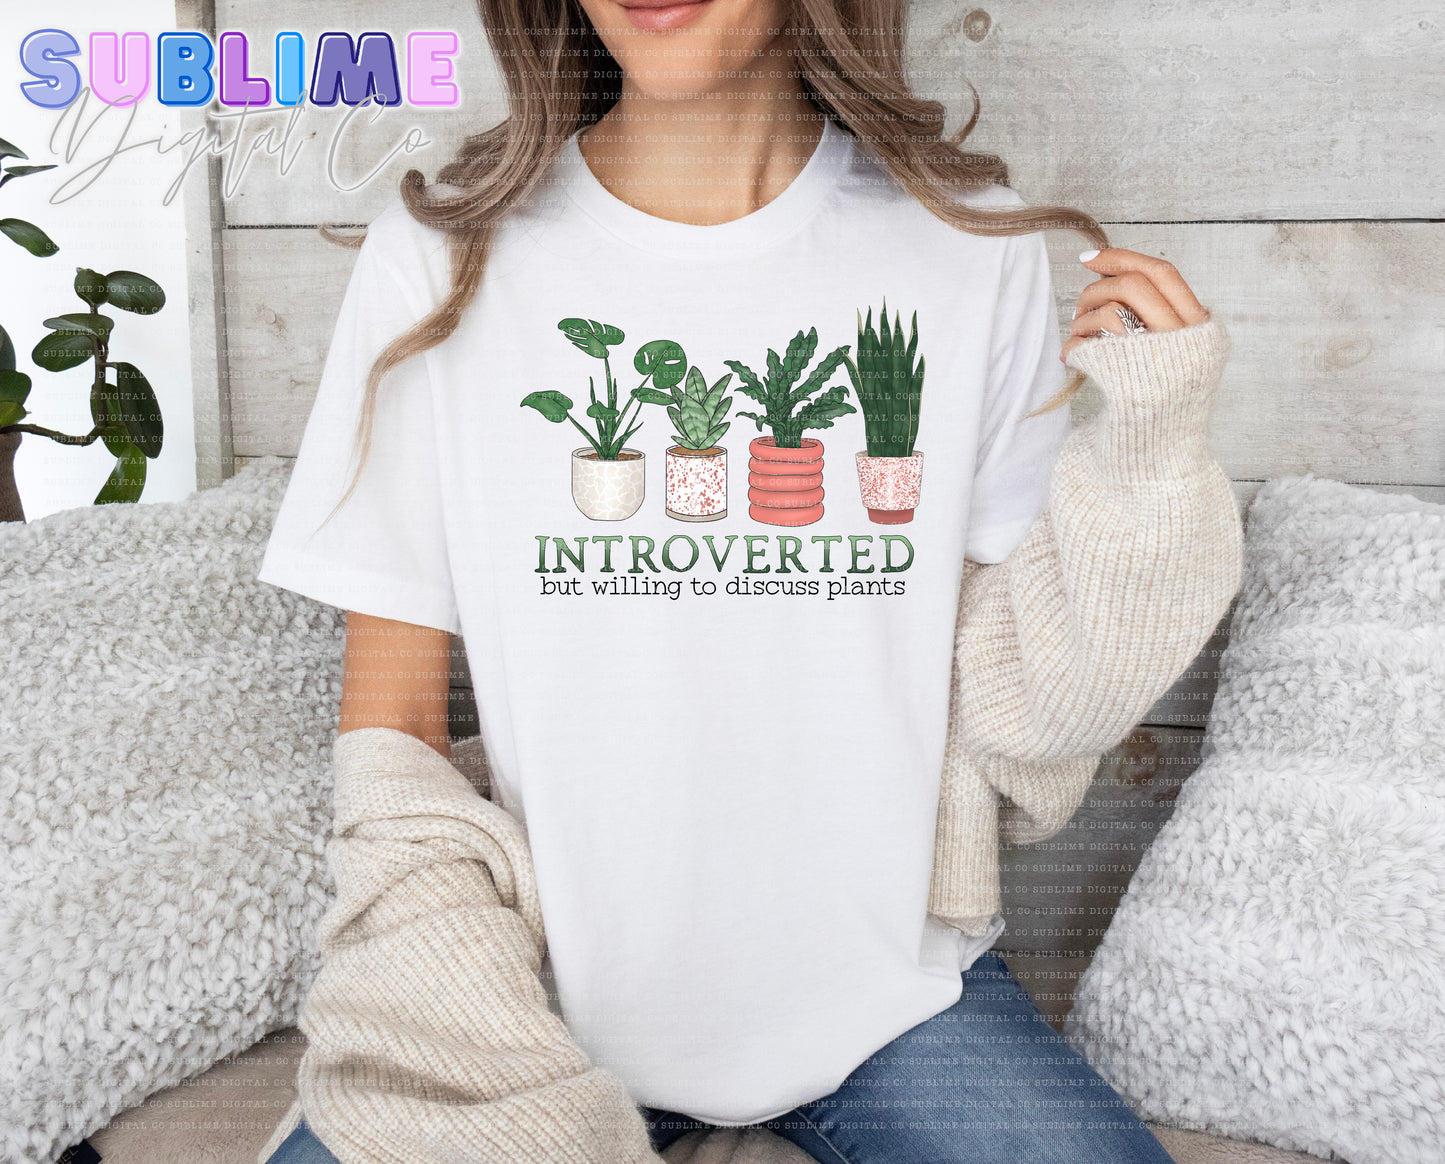 Introverted • Adult Apparel • Made to Order • TAT: Up To 21 Days